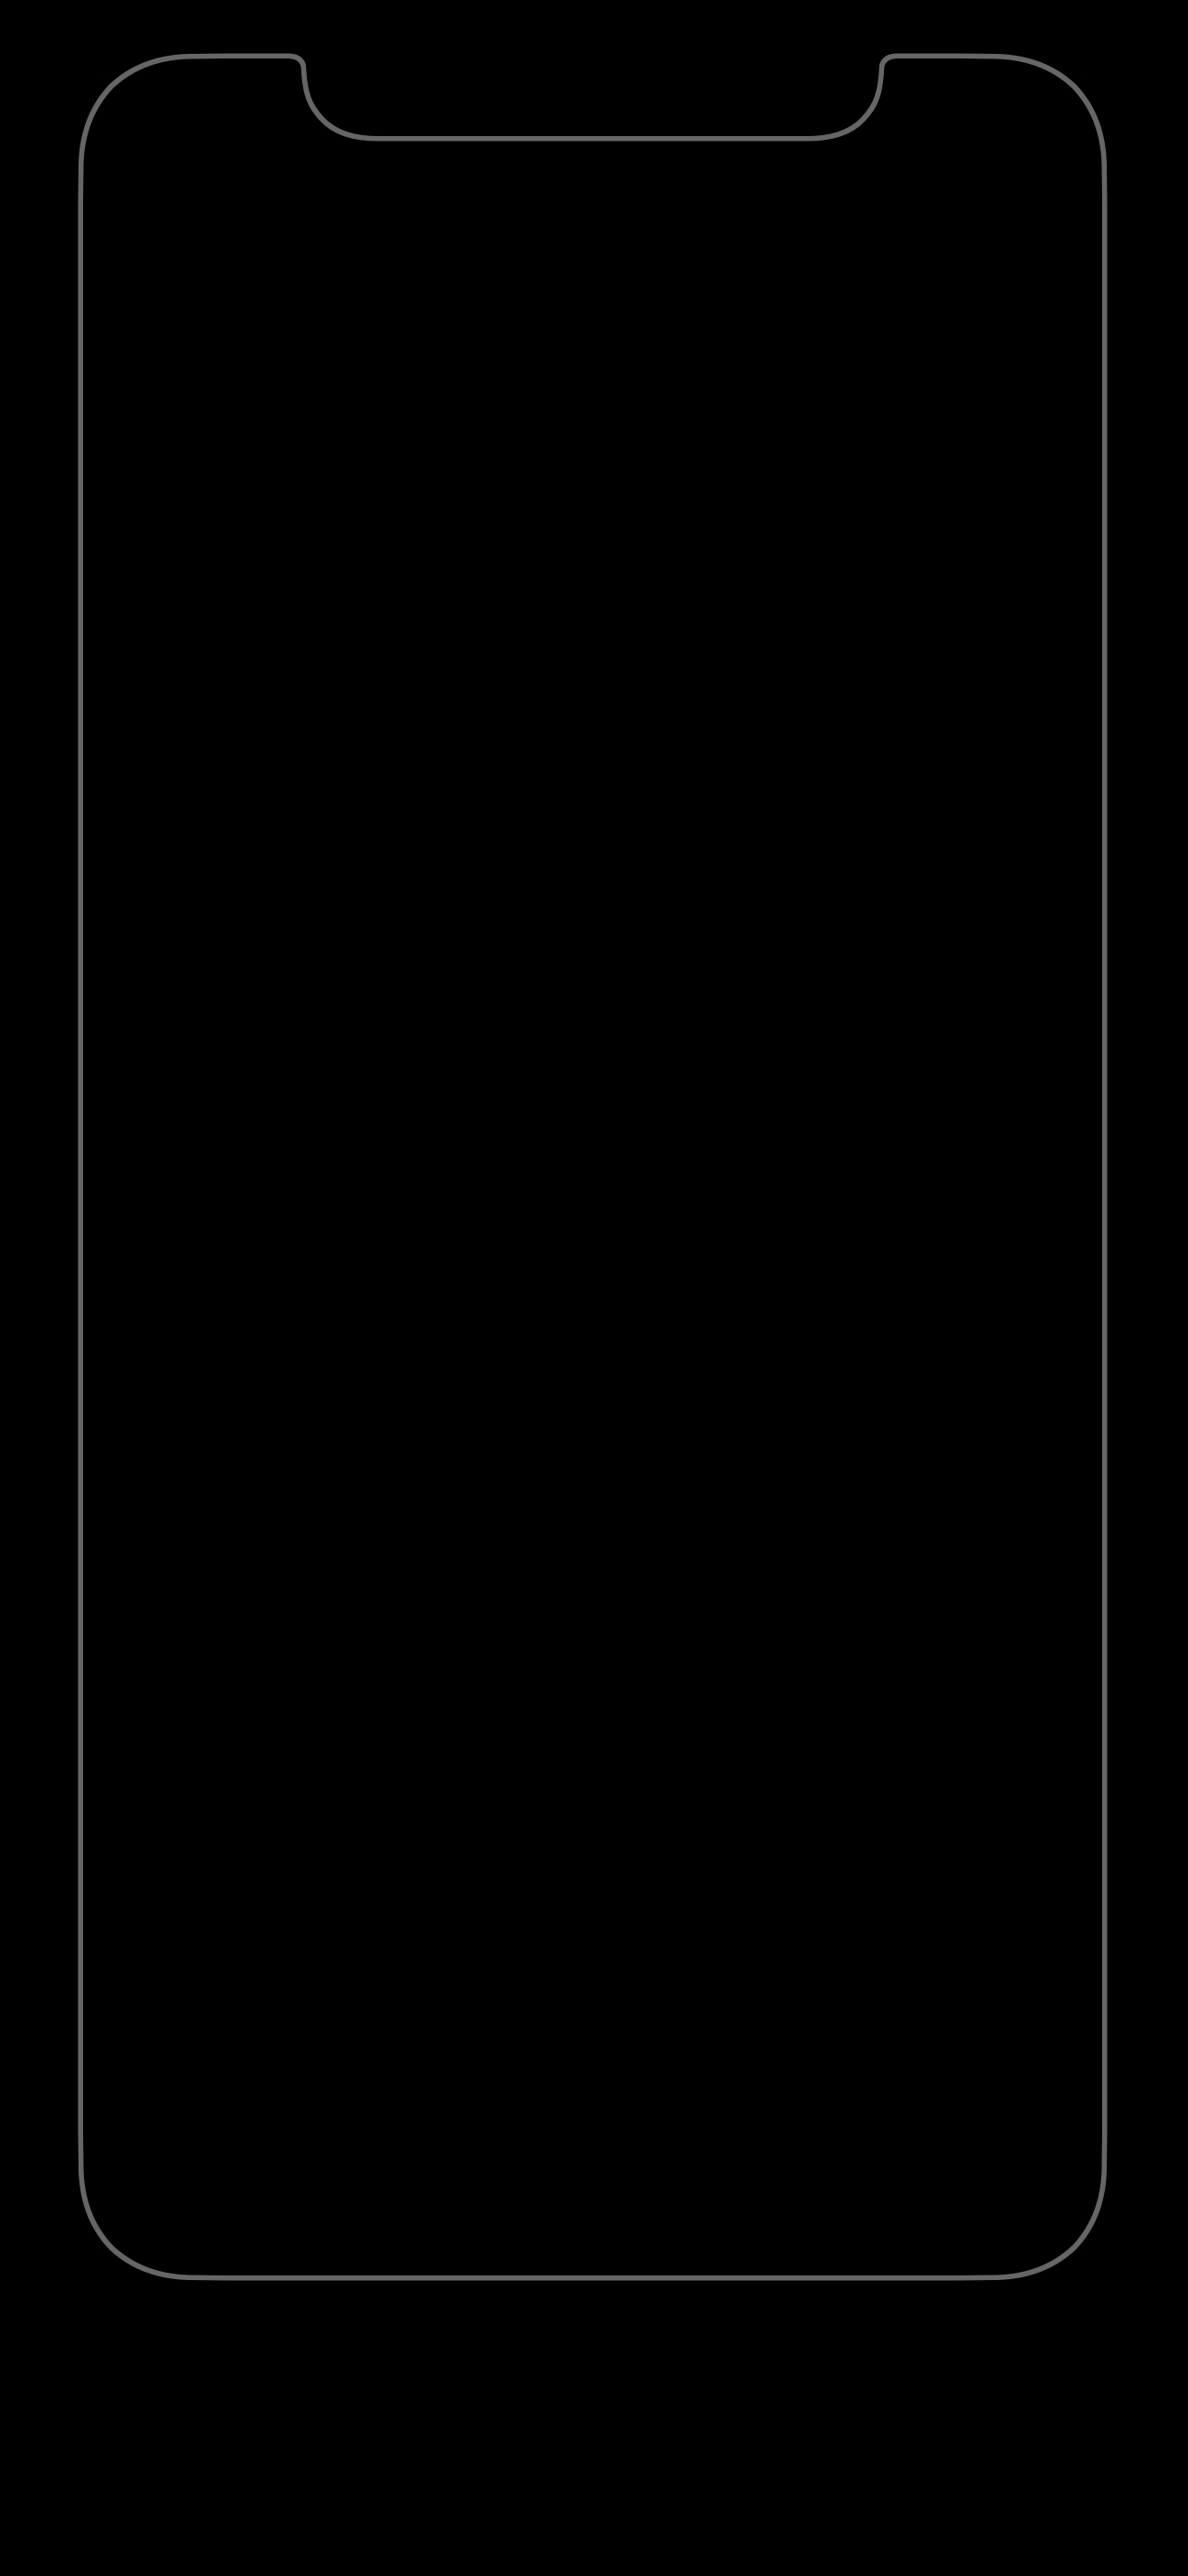 Pure Black Oled Wallpapers - 4K, Hd Pure Black Oled Backgrounds On